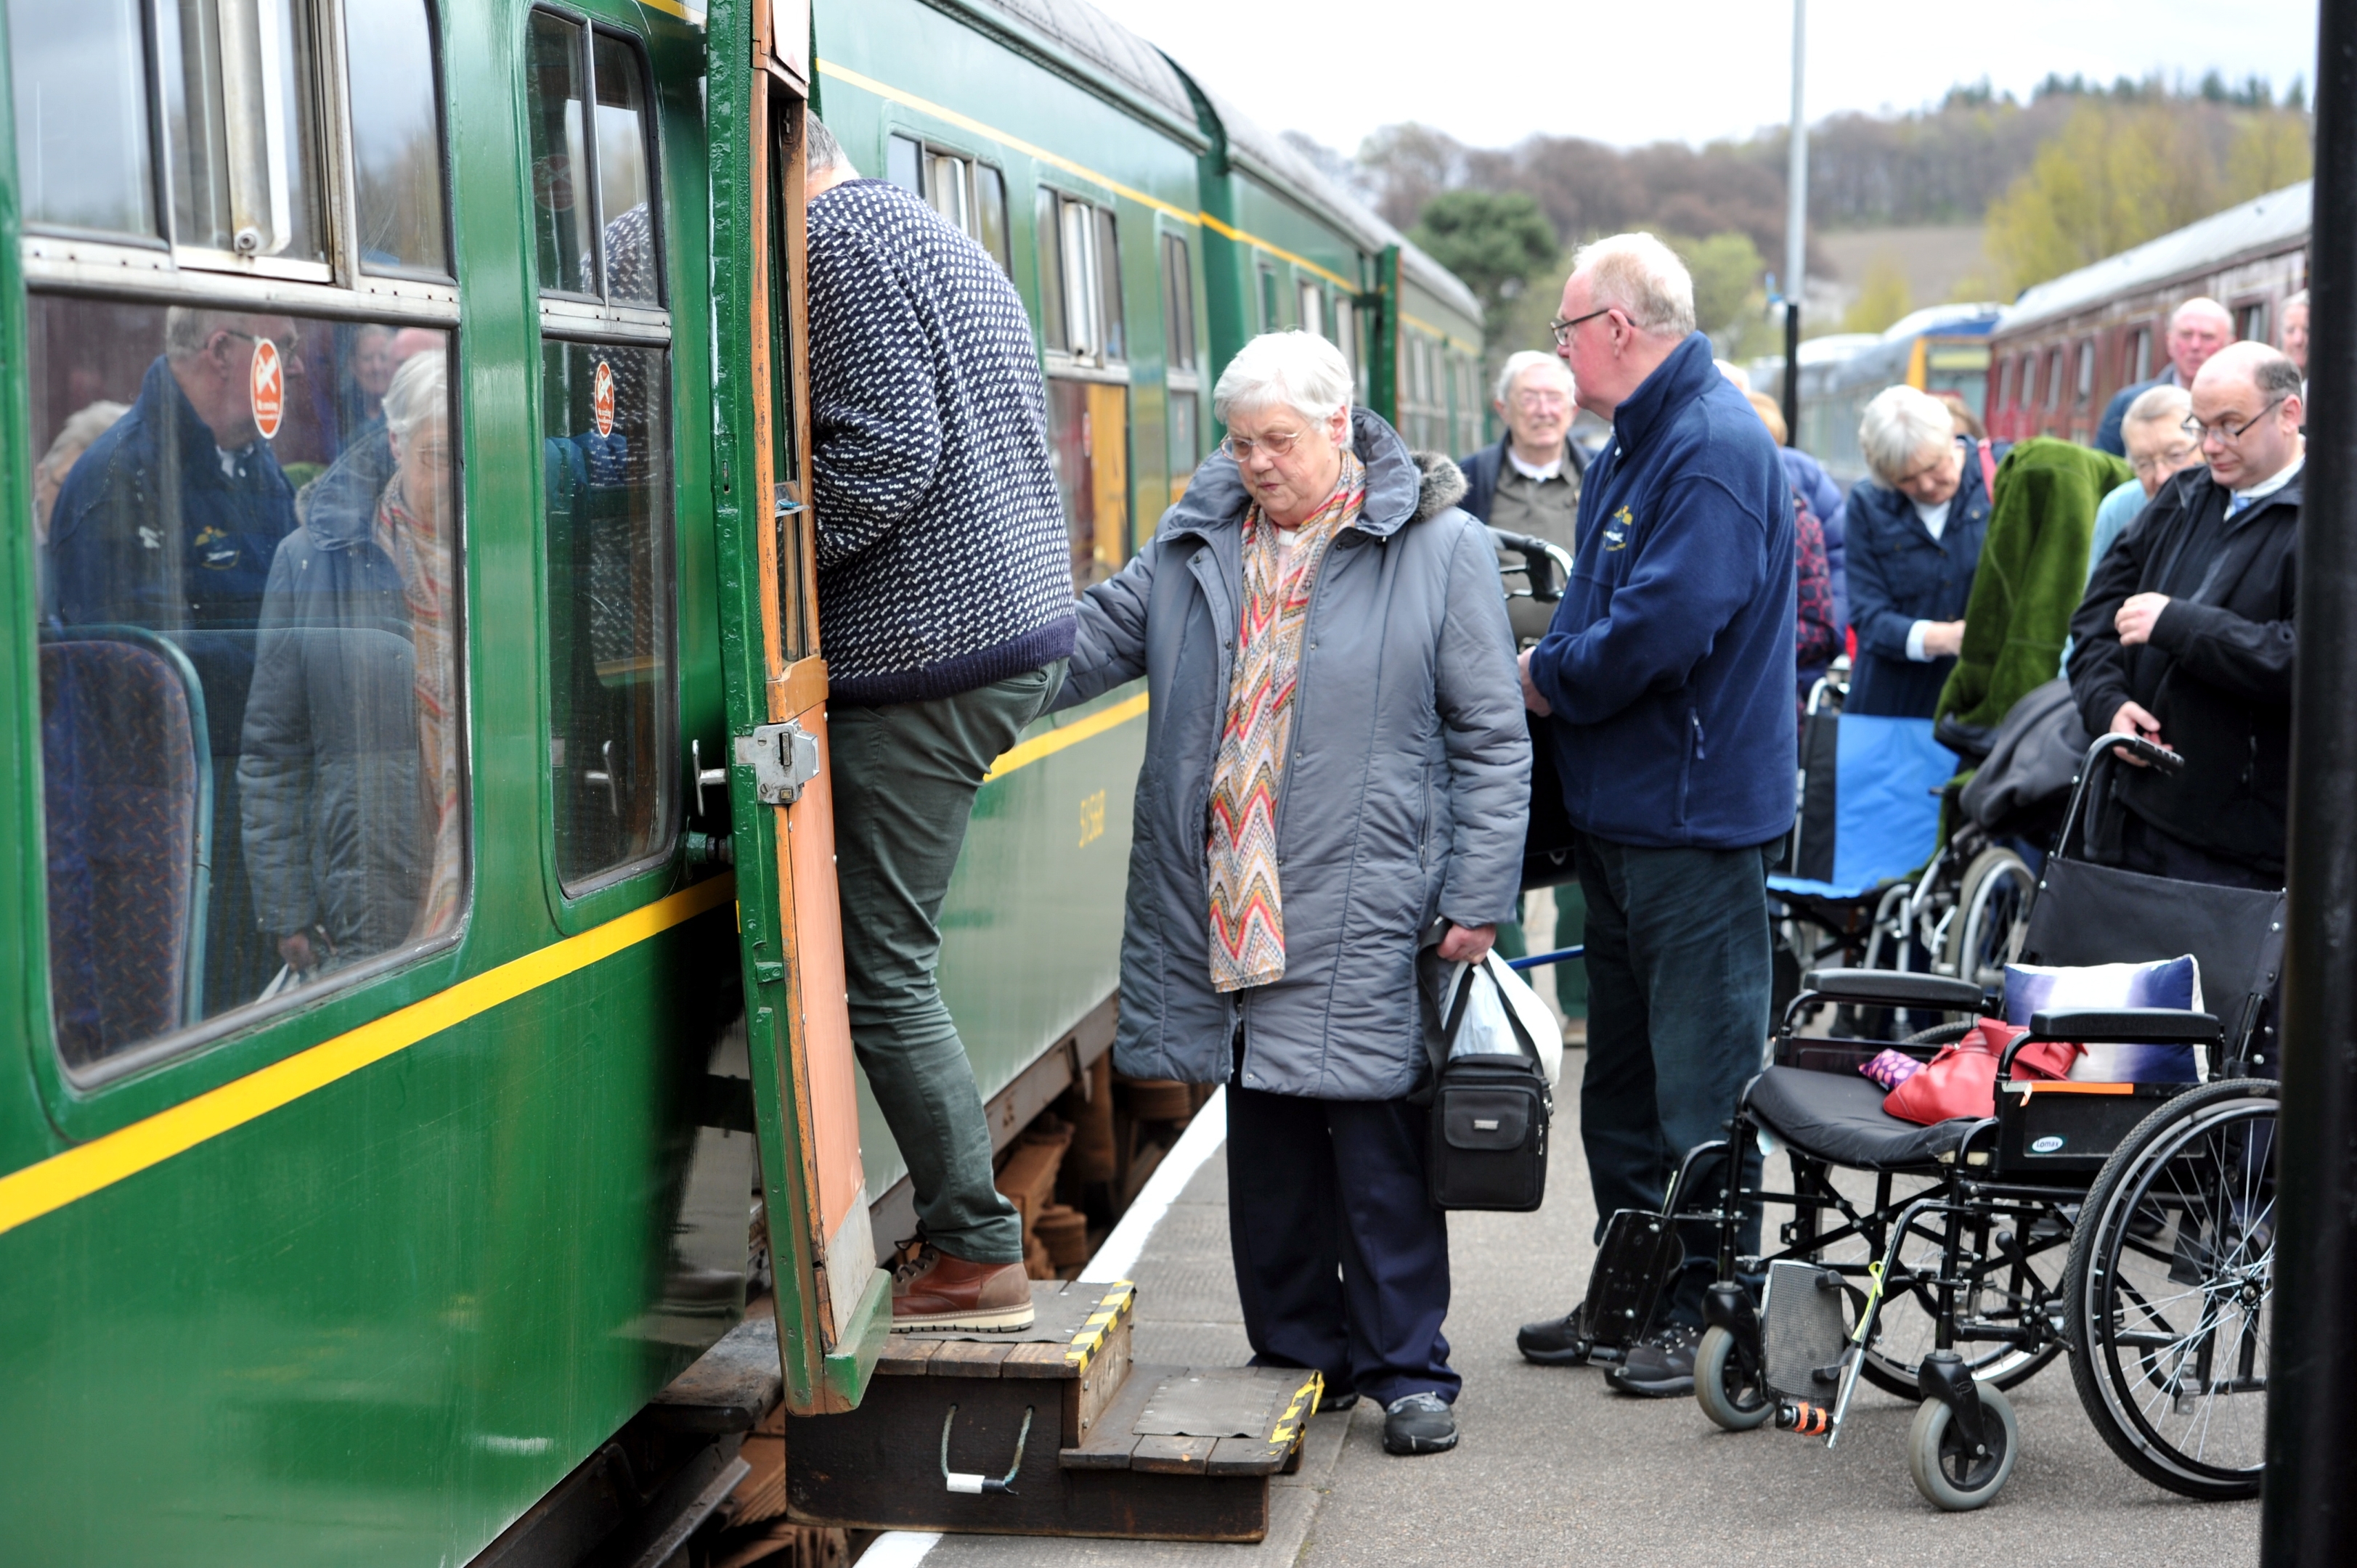 Members of Elgin Stroke Club boarding the train at Dufftown Station during their visit to Keith and Dufftown Railway. 